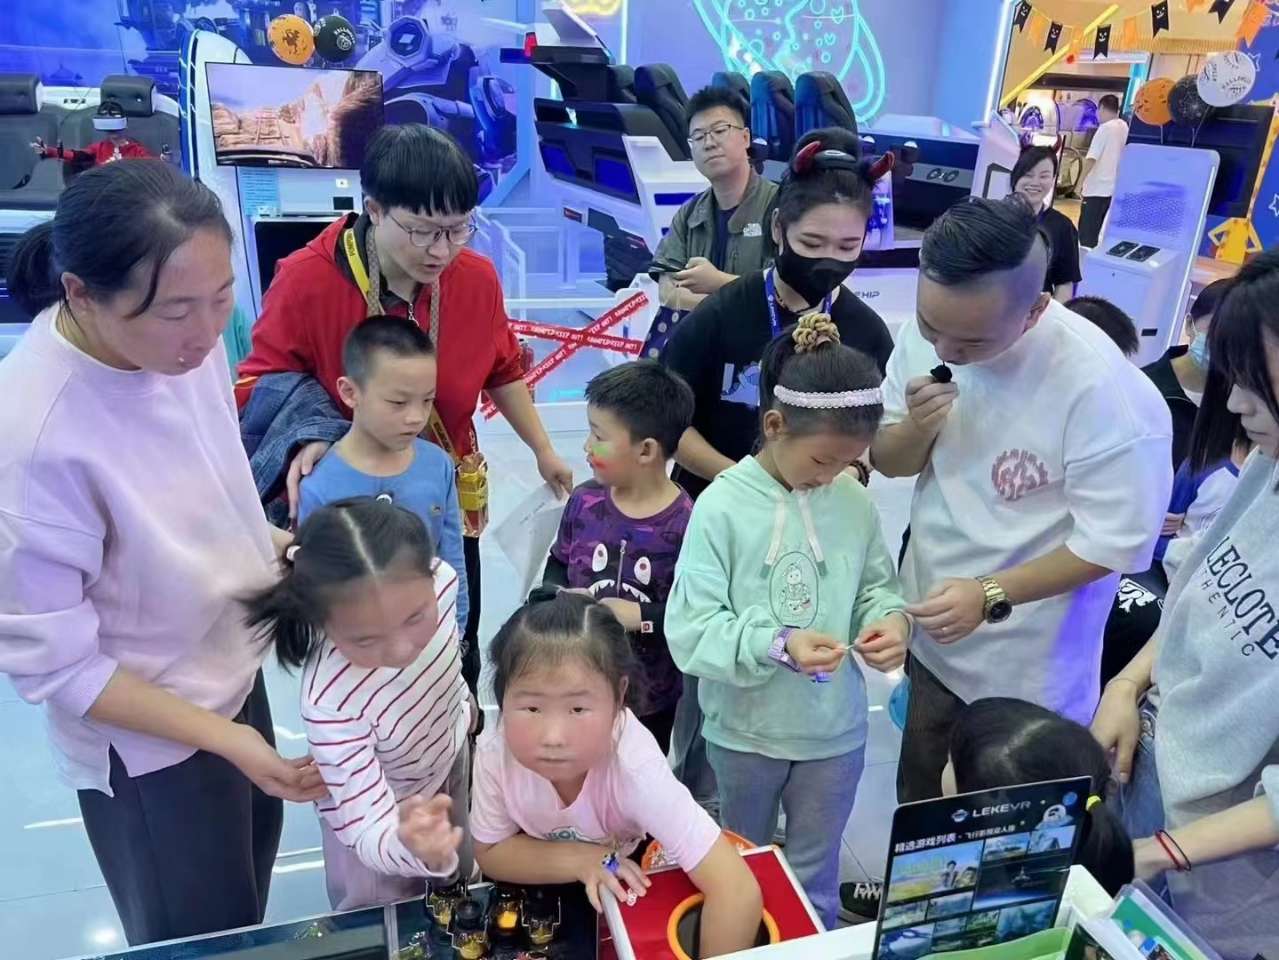 LEKEVR is the largest VR game center brand in China.